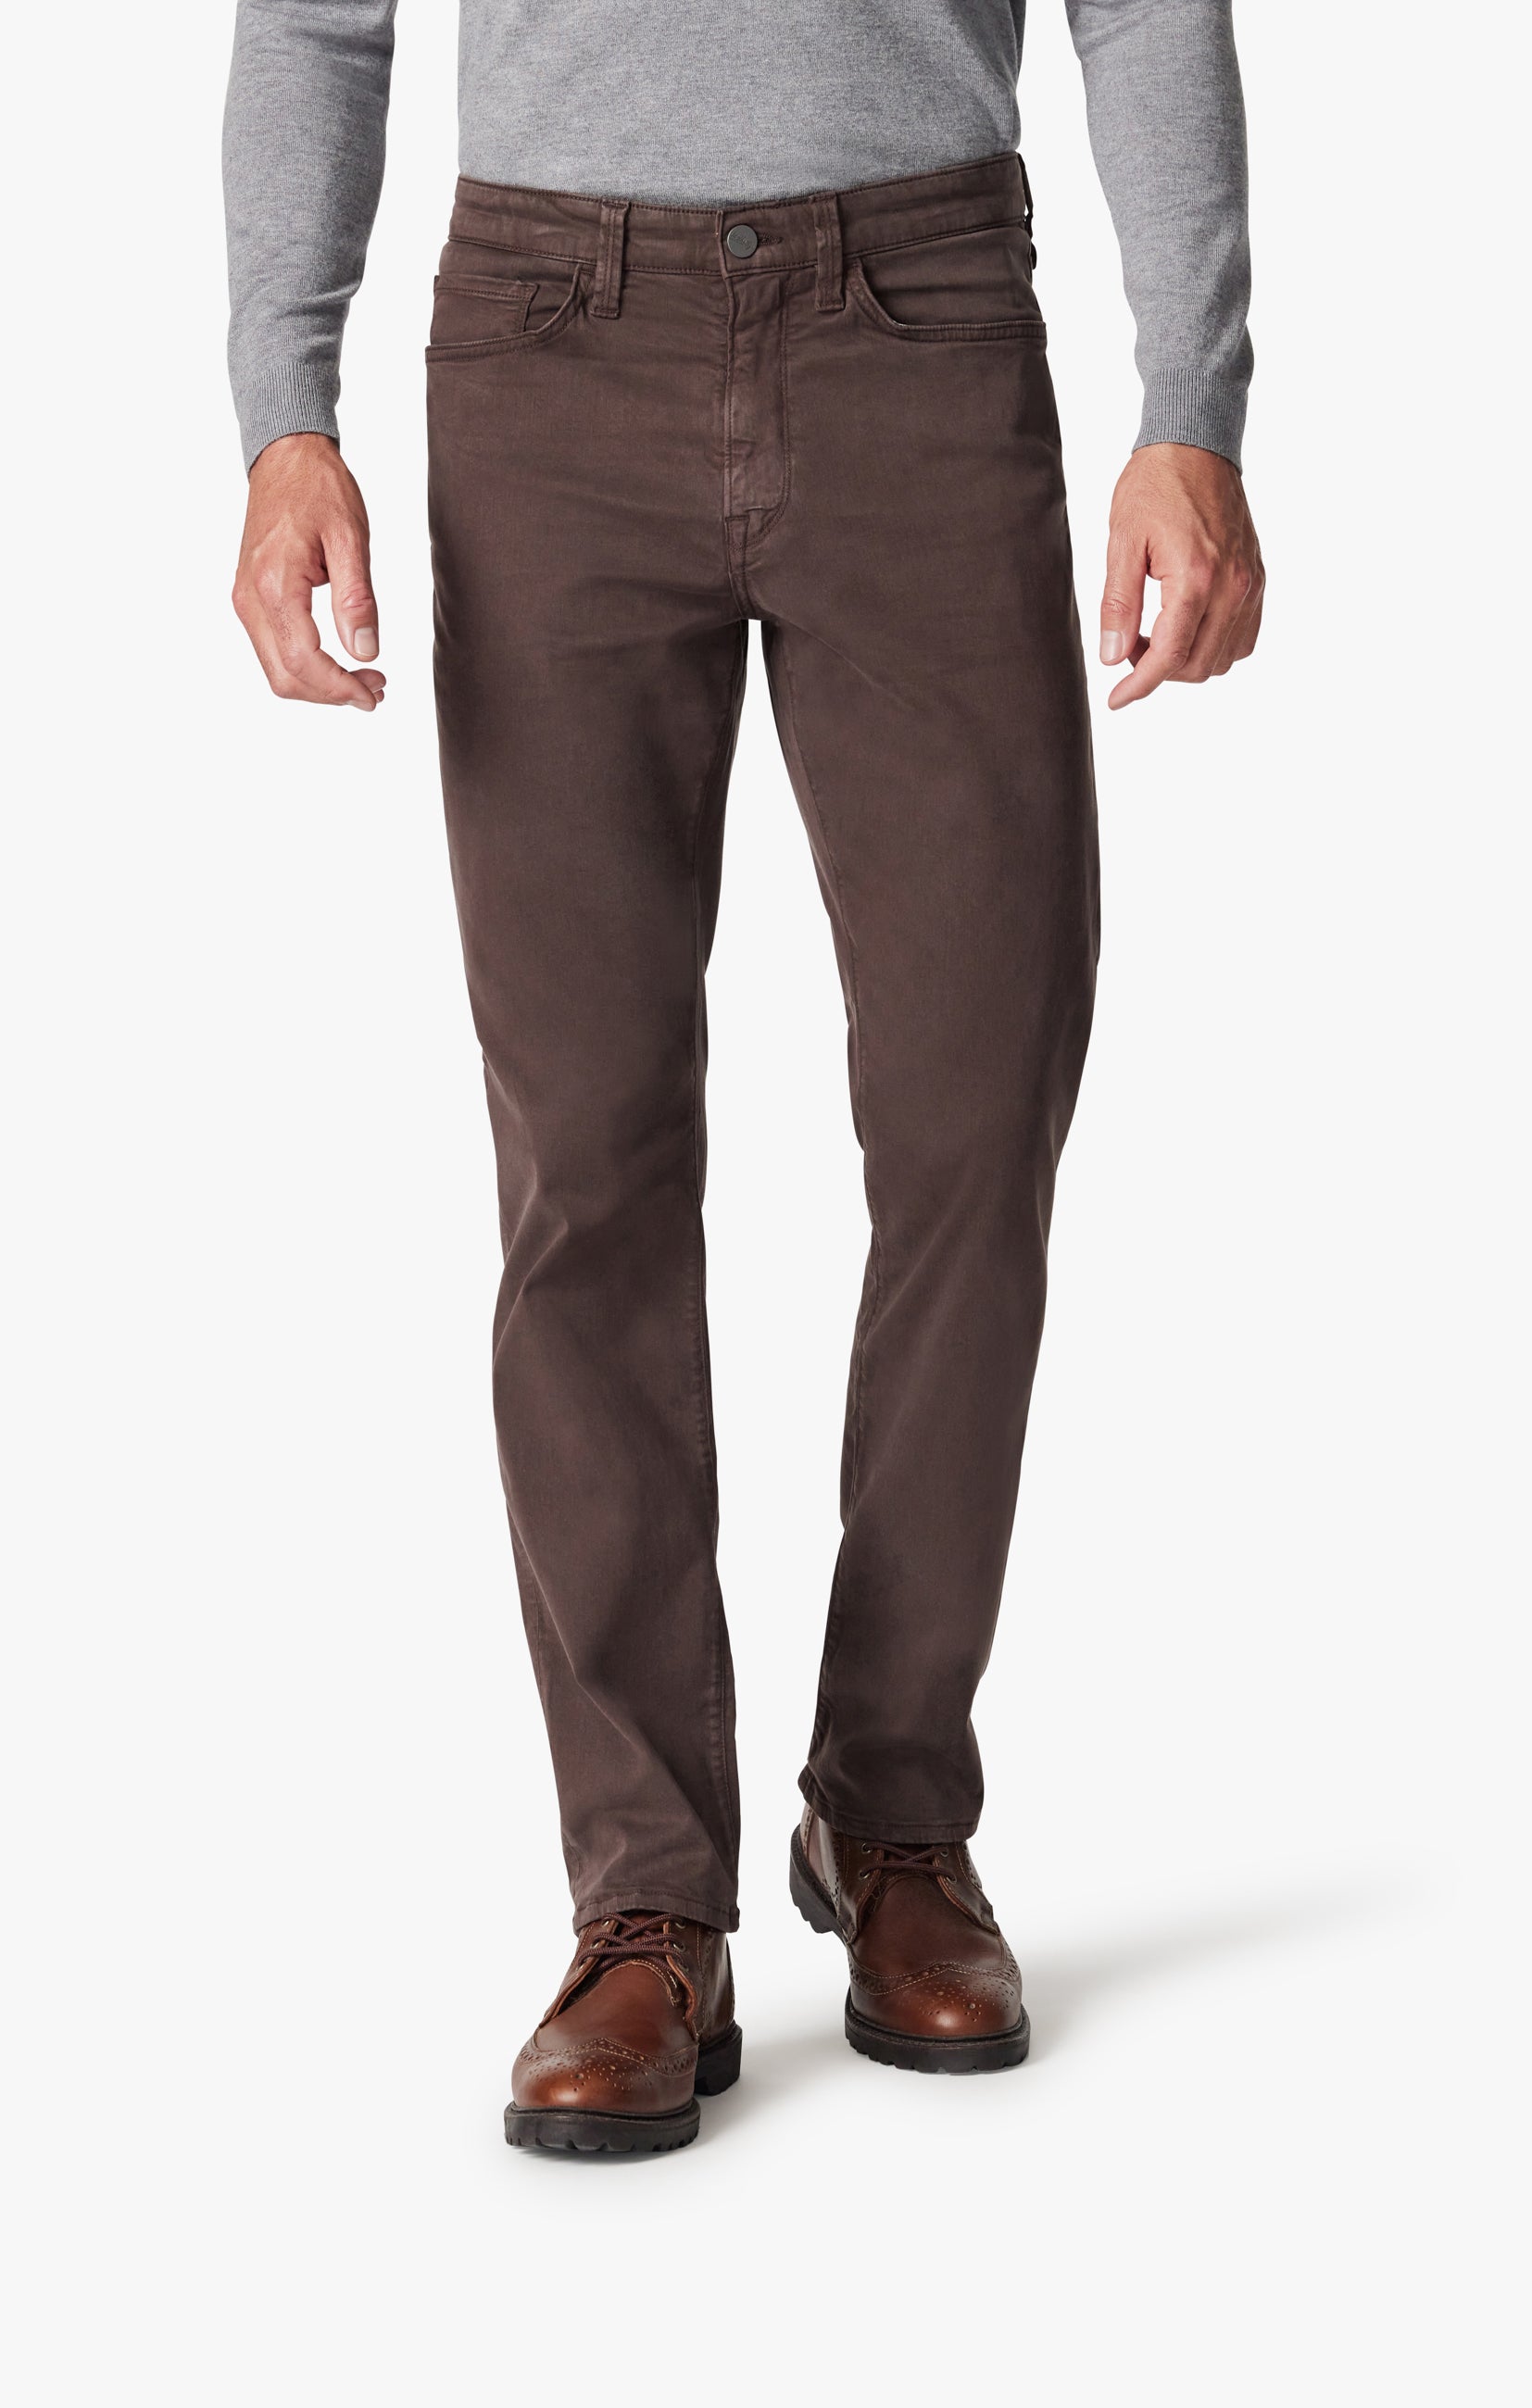 Charisma Relaxed Straight Leg Pants In Fudge Twill Image 4